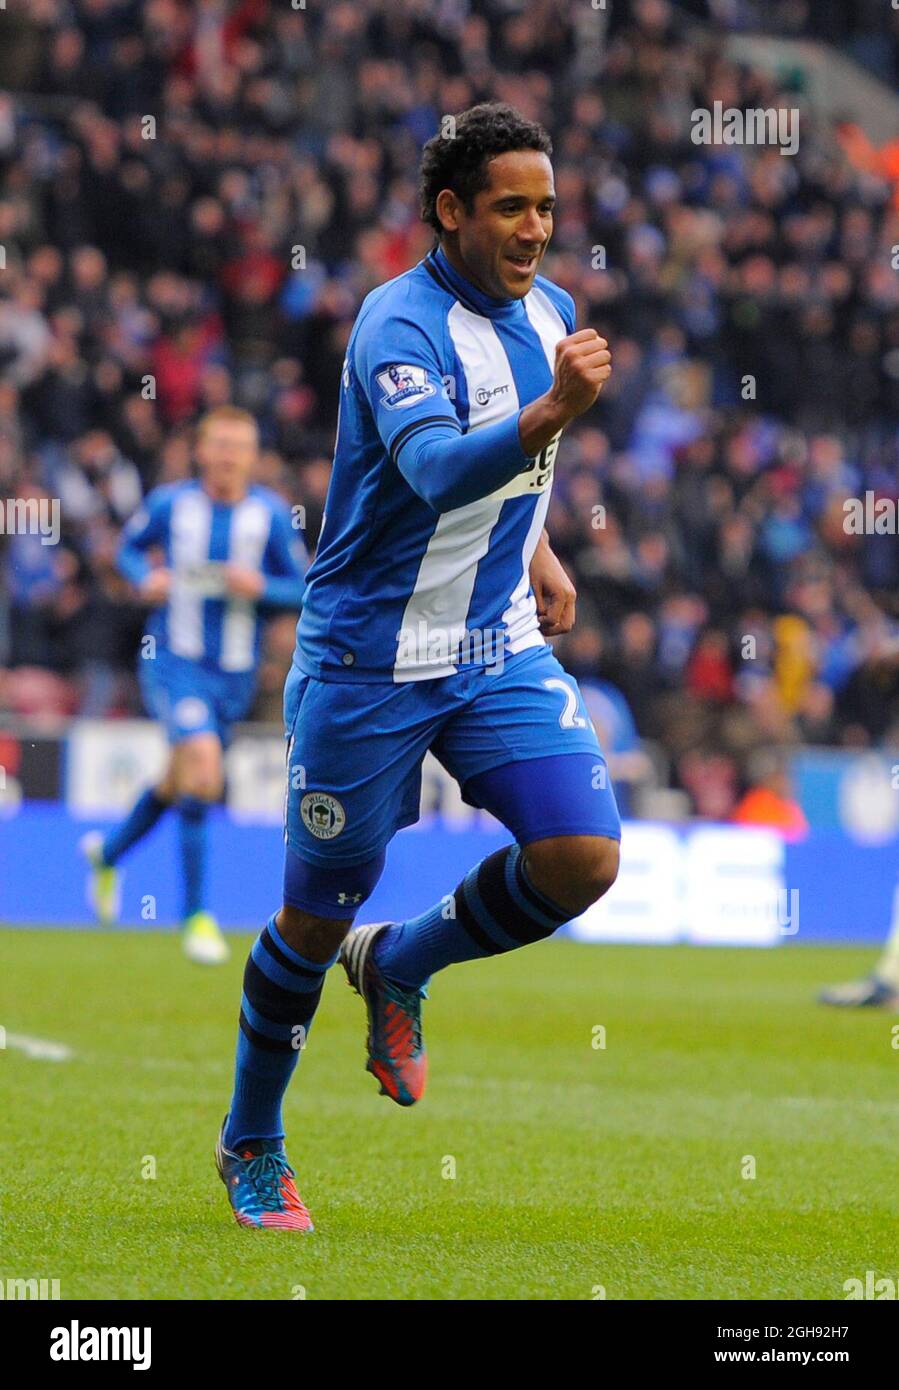 Jean Beausejour of Wigan Athletic celebrates scoring the first goal during the Barclays Premier League between Wigan Athletic and Newcastle United at the DW Stadium in Wigan on March 17, 2013. Picture Simon Bellis. Stock Photo